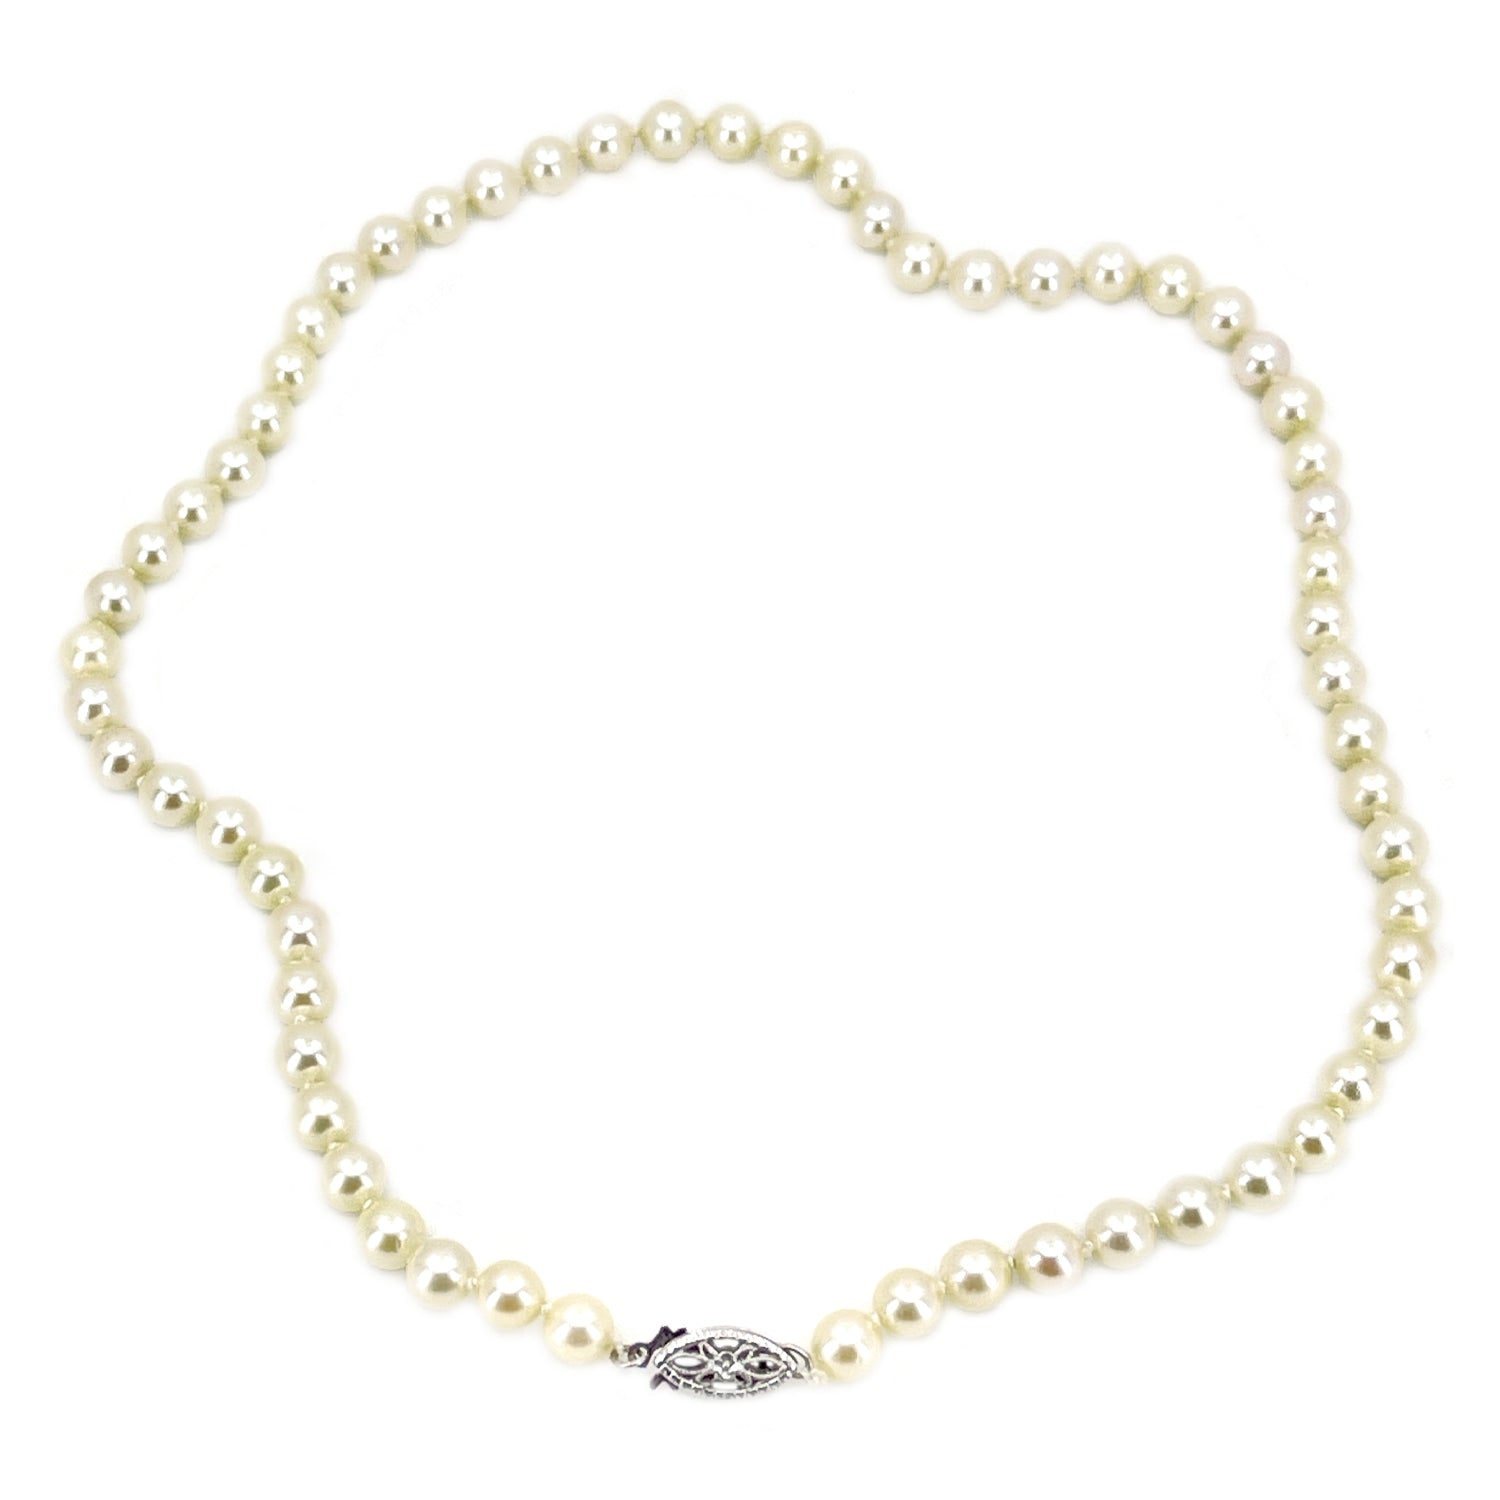 Floral Choker Japanese Saltwater Cultured Akoya Pearl Strand - 14K White Gold 15 Inch